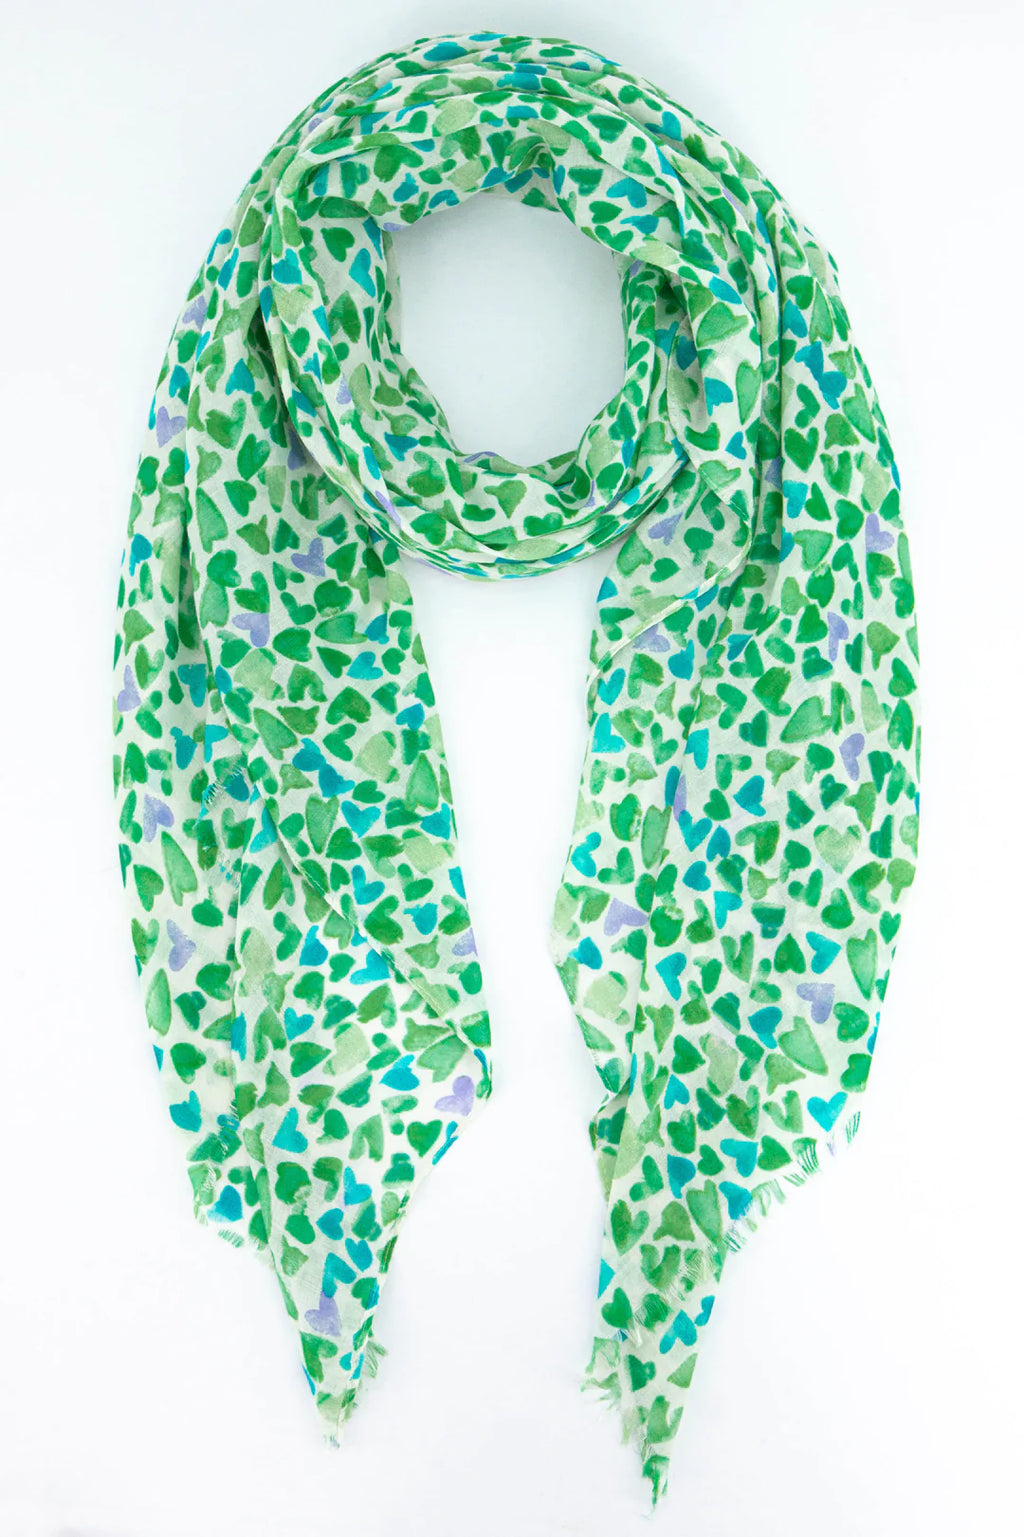 Sketched Love Heart Print Scarf in Green